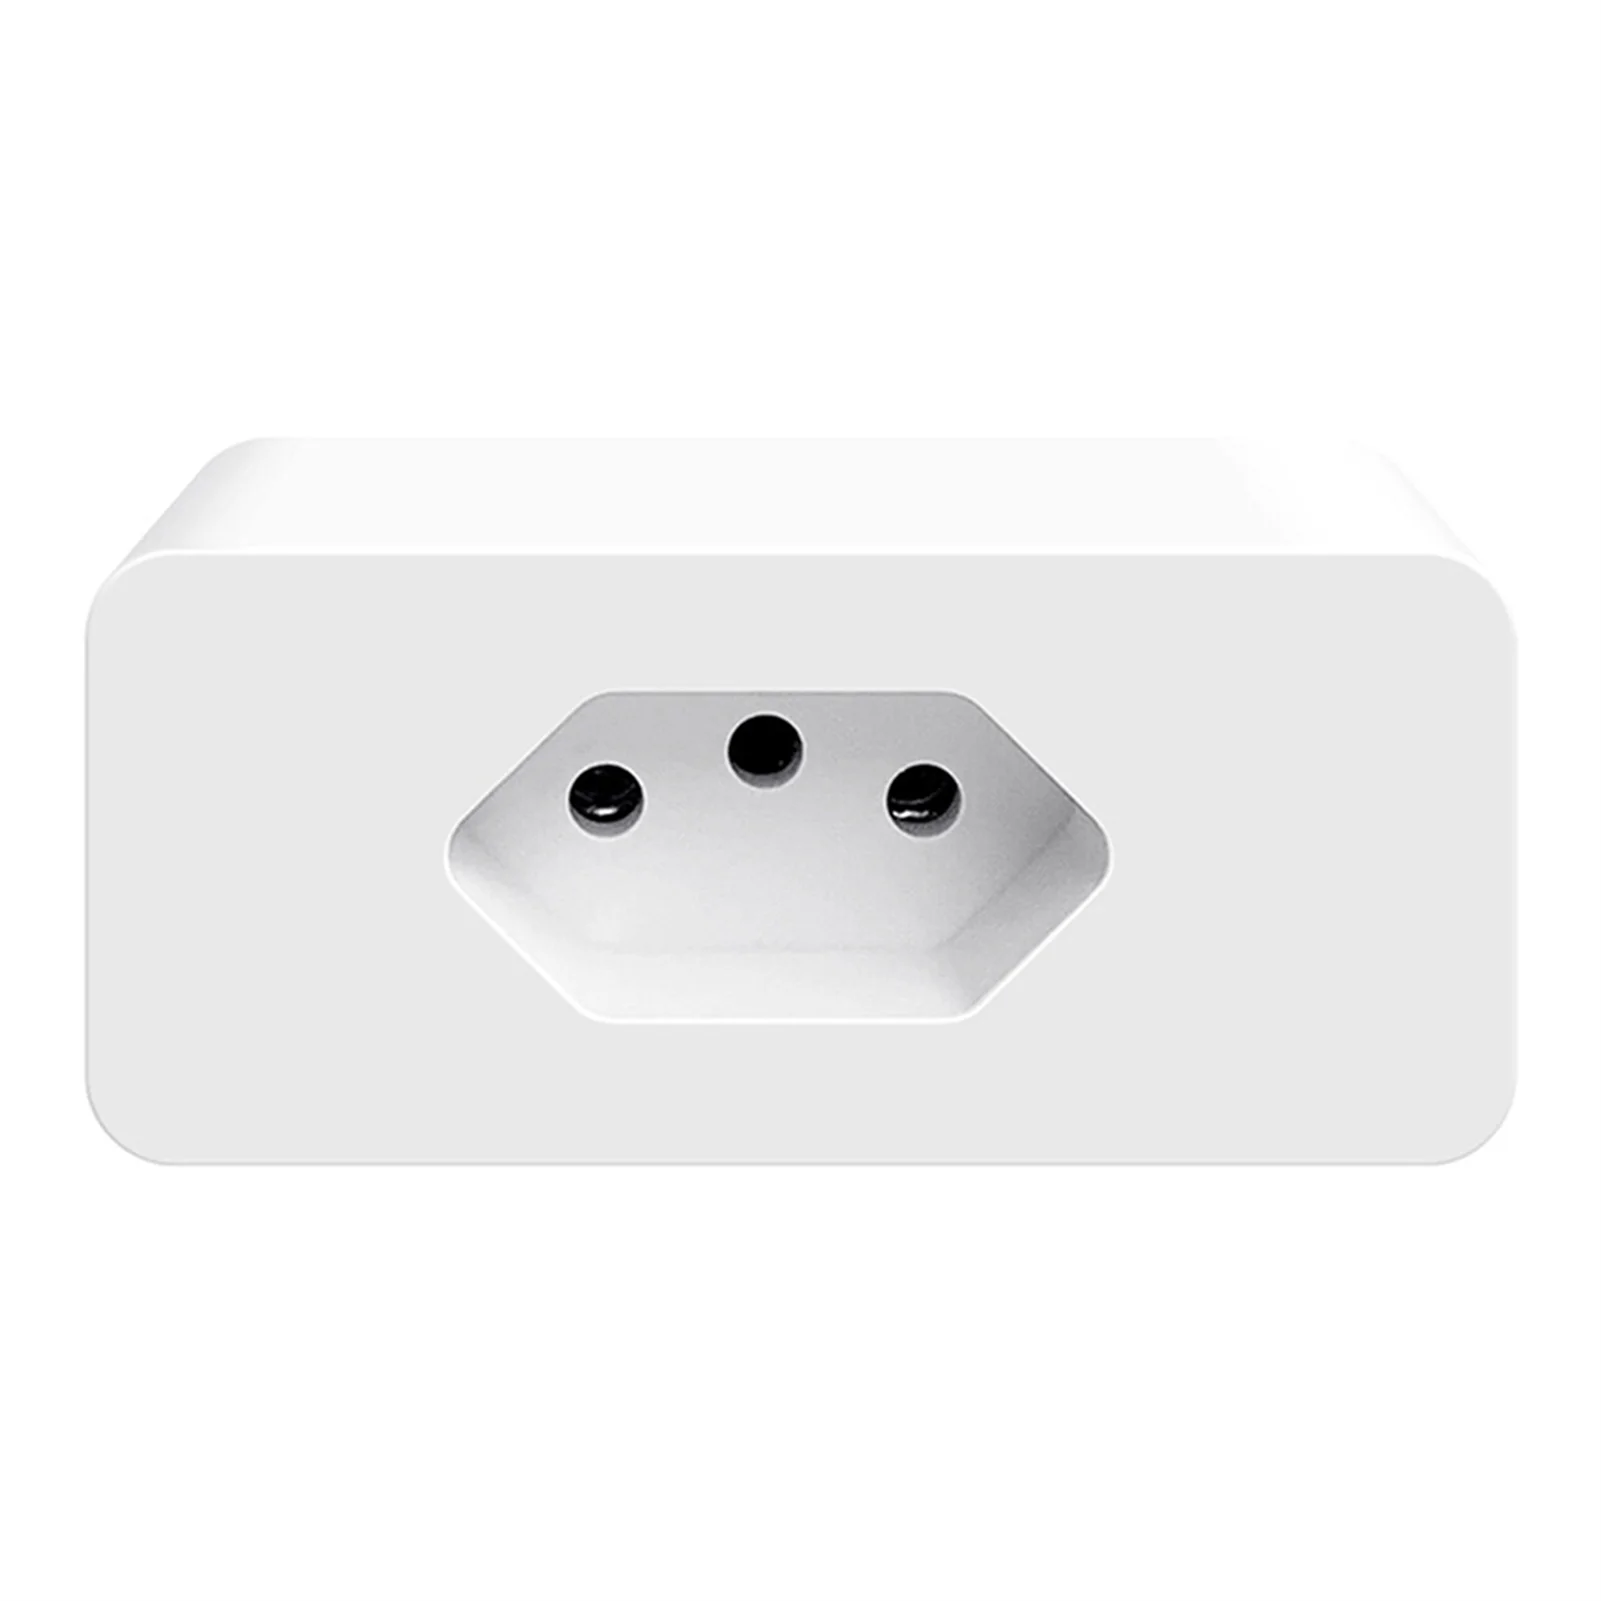 

Smart Socket Outlet 2 4GHz WiFi App Control Compatible with Smart Speaker Assistant for Alexa for Google for Home